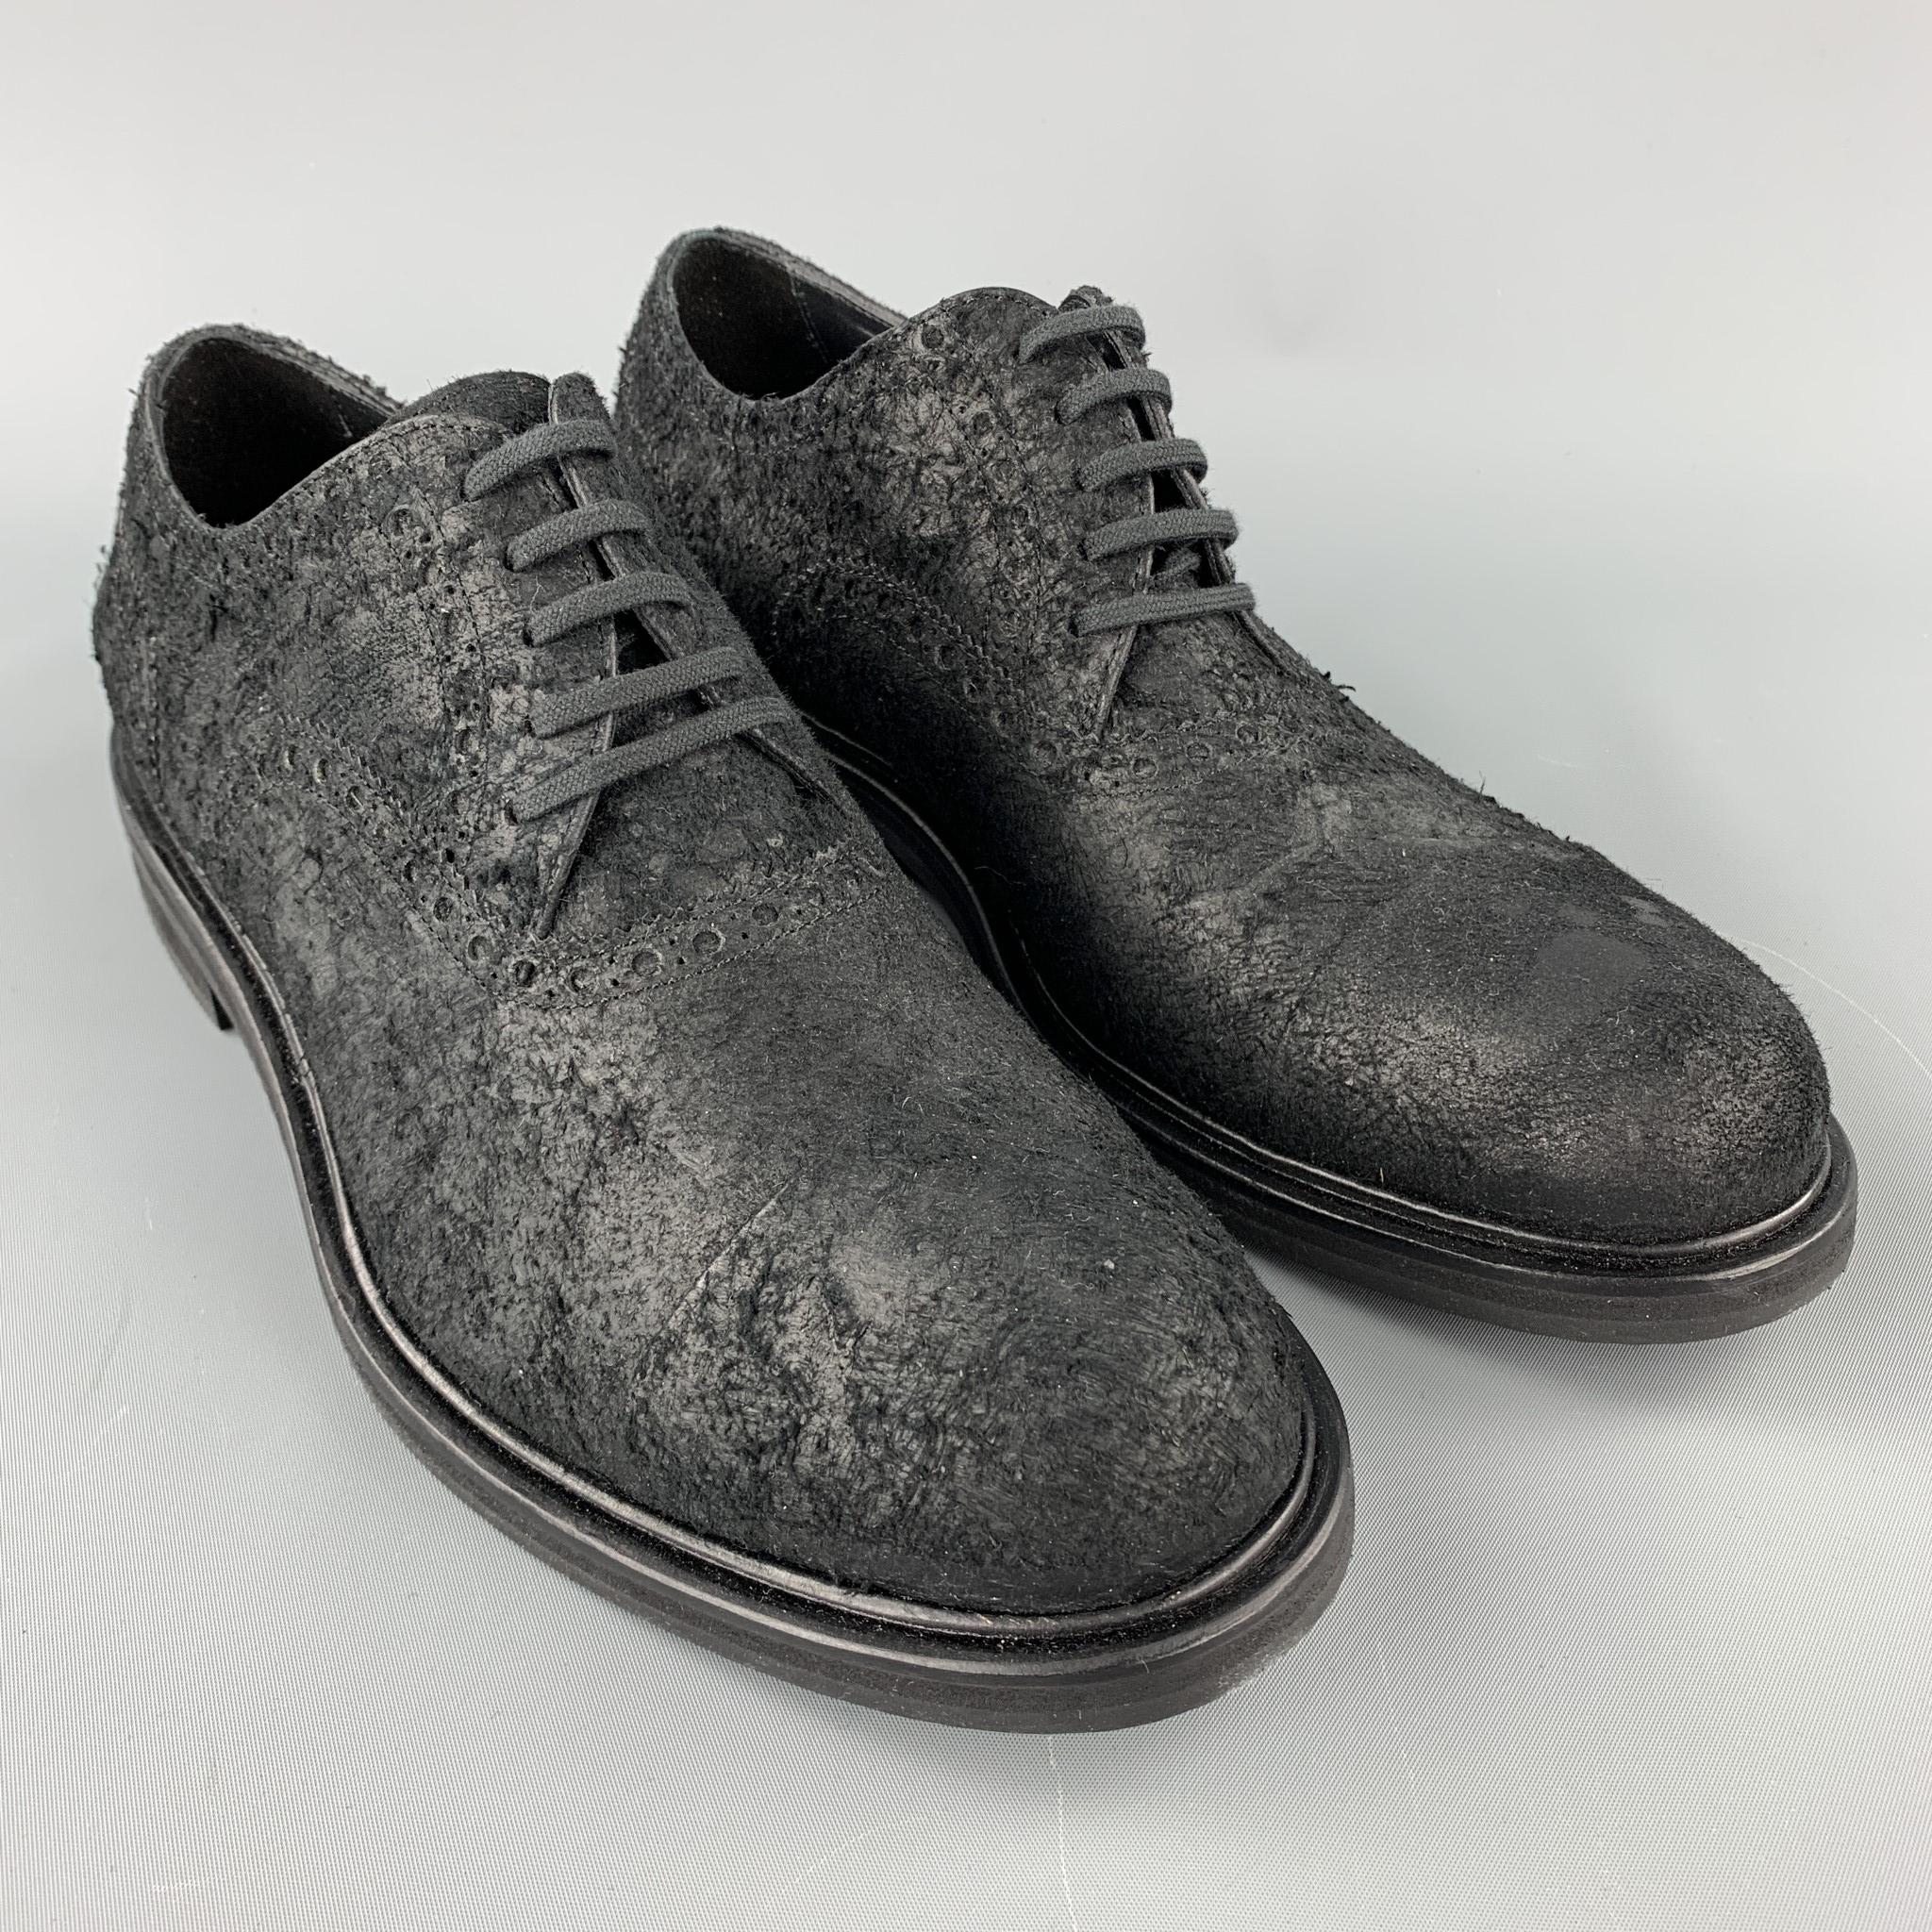 NEIL BARRETT shoes comes in a black textured suede featuring a cap toe, lace up, and a wooden sole. Made in Italy.

New With Box.
Marked: IT 43

Outsole:

12 in. x 4.5 in. 